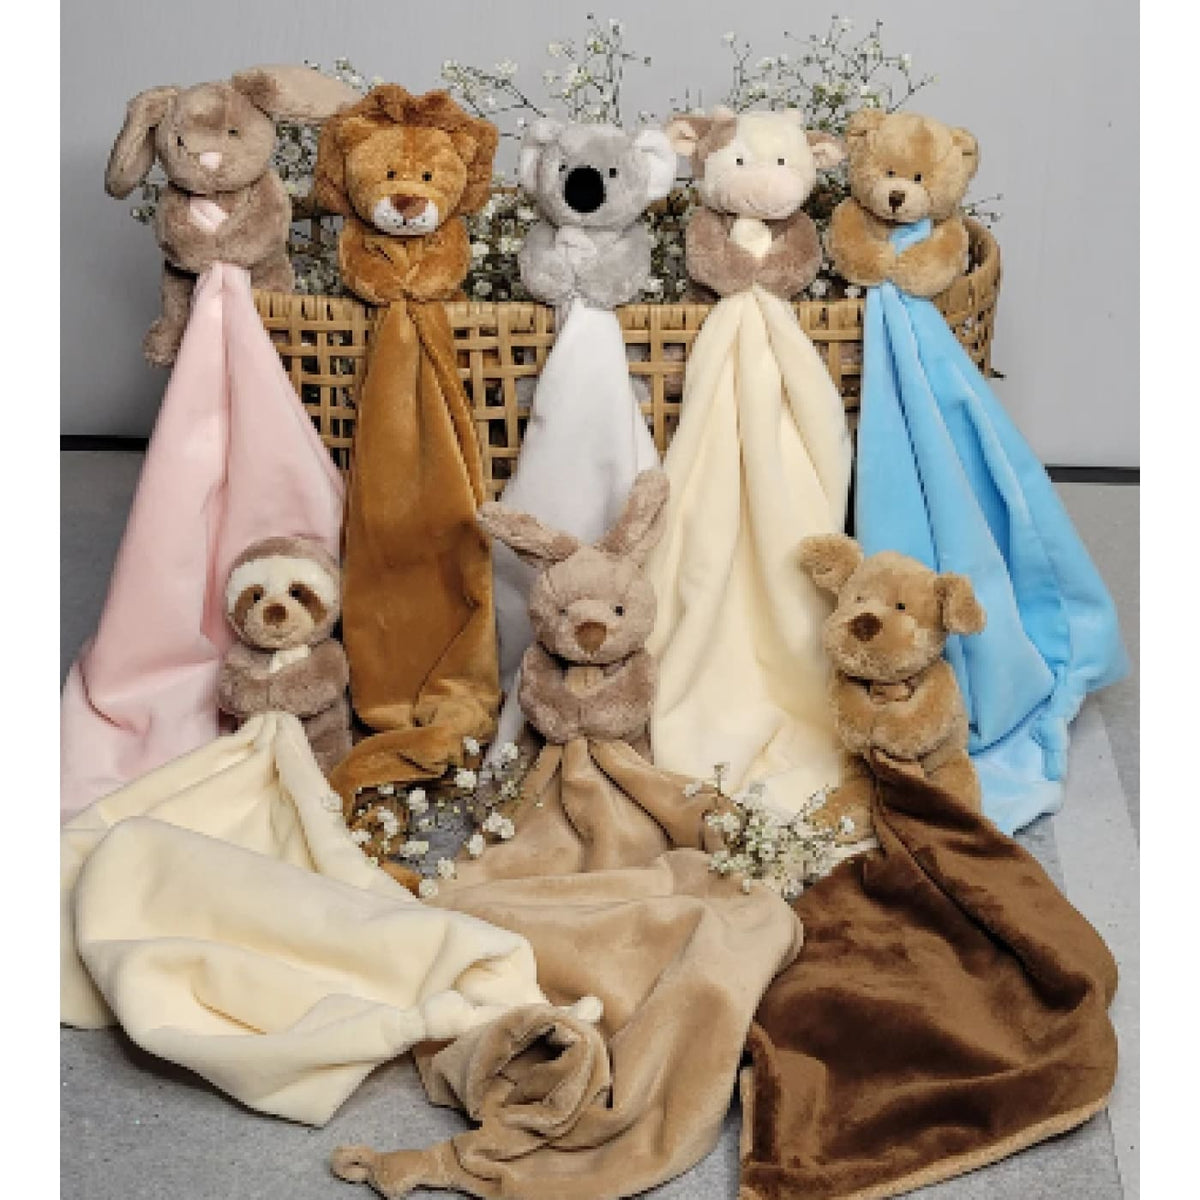 Petite Vous Comfort Blanket Sonny the Sloth - Sloth - TOYS &amp; PLAY - BLANKIES/COMFORTERS/RATTLES